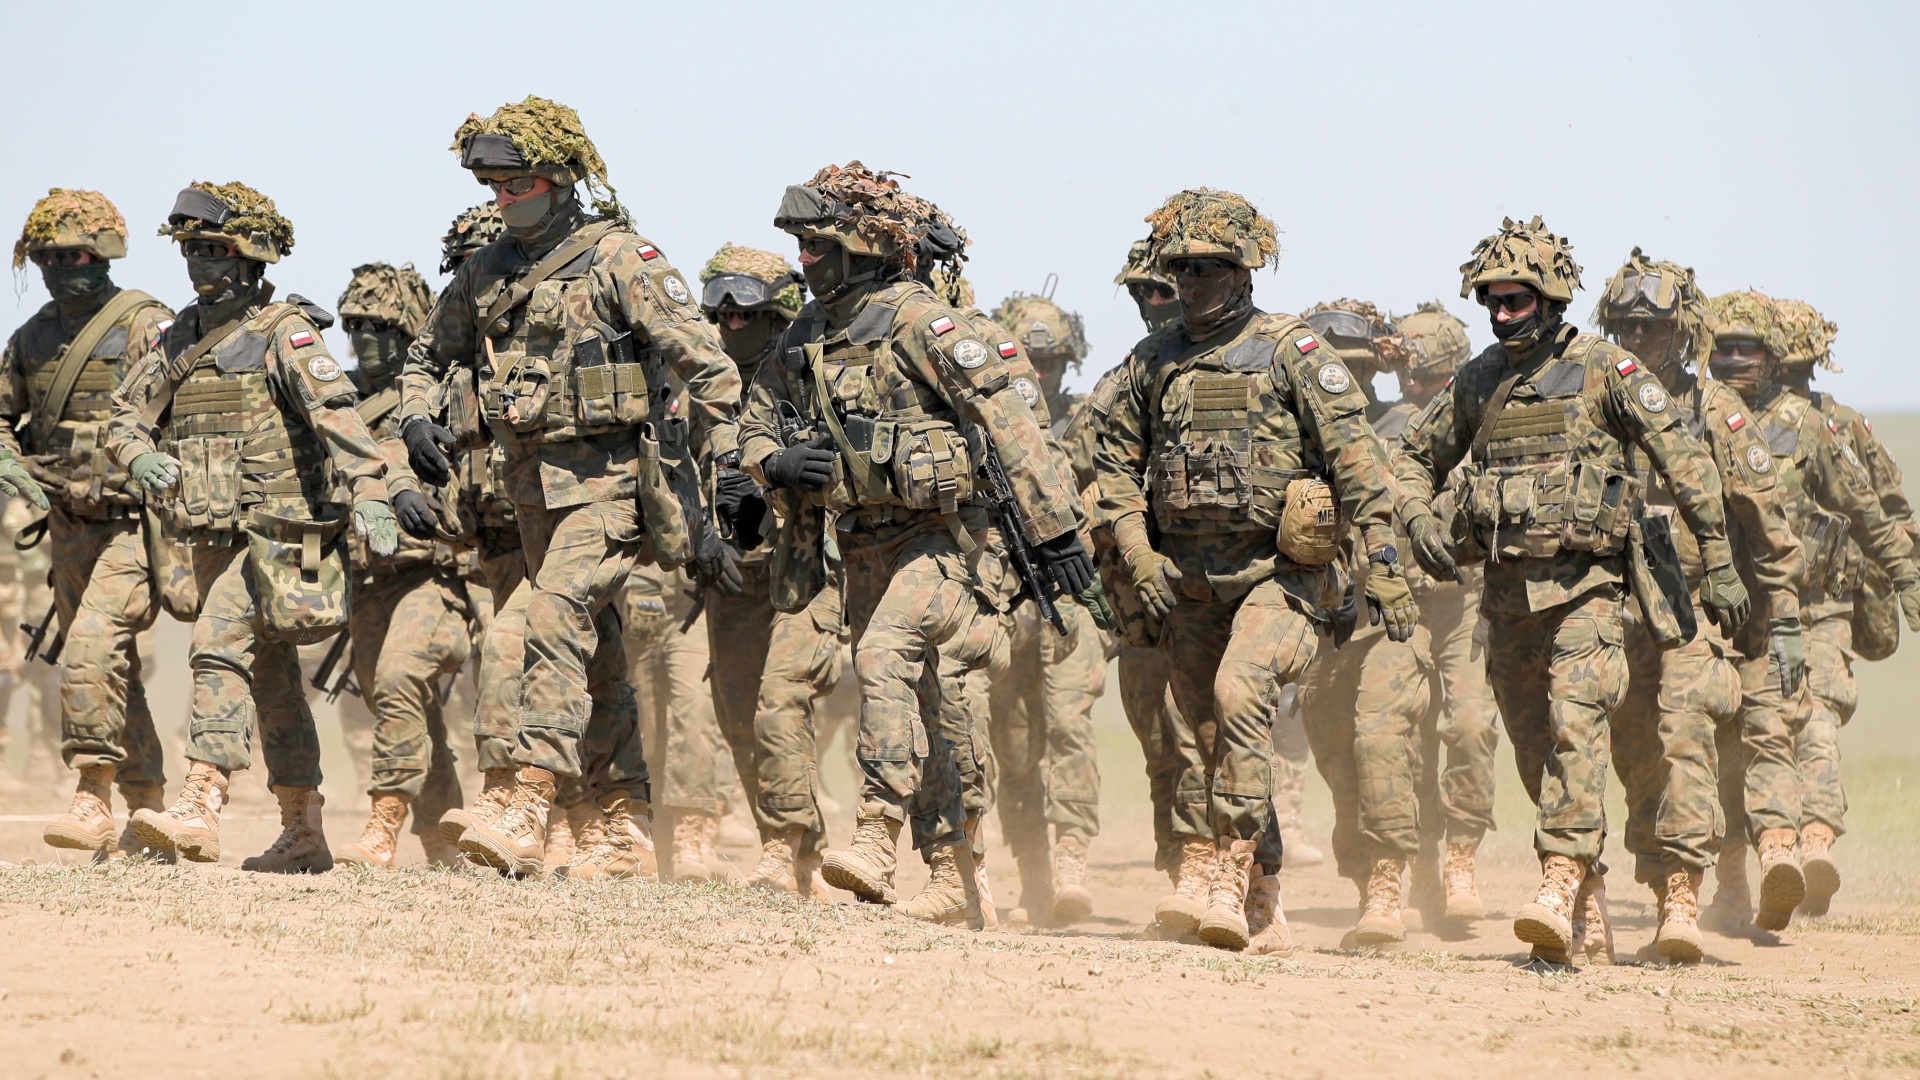 Polish troops march after the Justice Sword 21 exercise at the Smardan military shooting range, Romania, May 11, 2021. Justice Sword was part of Defender Europe 21, a large-scale US Army-led, multinational, joint exercise designed to build 'readiness and interoperability' between the US, NATO and partner militaries. 